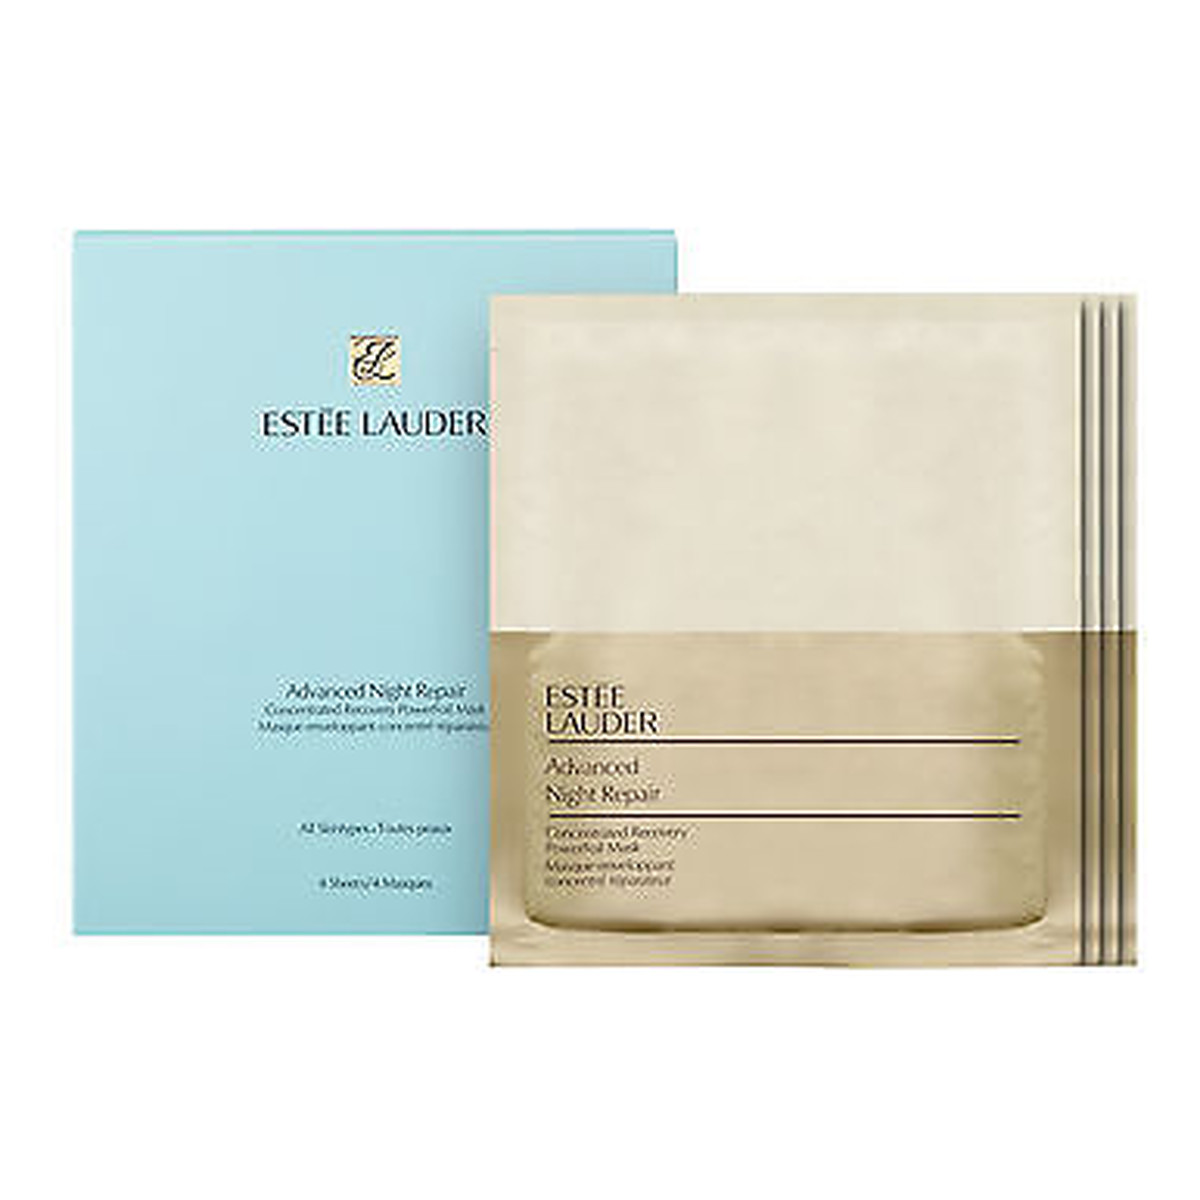 Estee Lauder Advanced Night Repair Concentrated Recovery PowerFoil Mask maseczka do twarzy 100ml